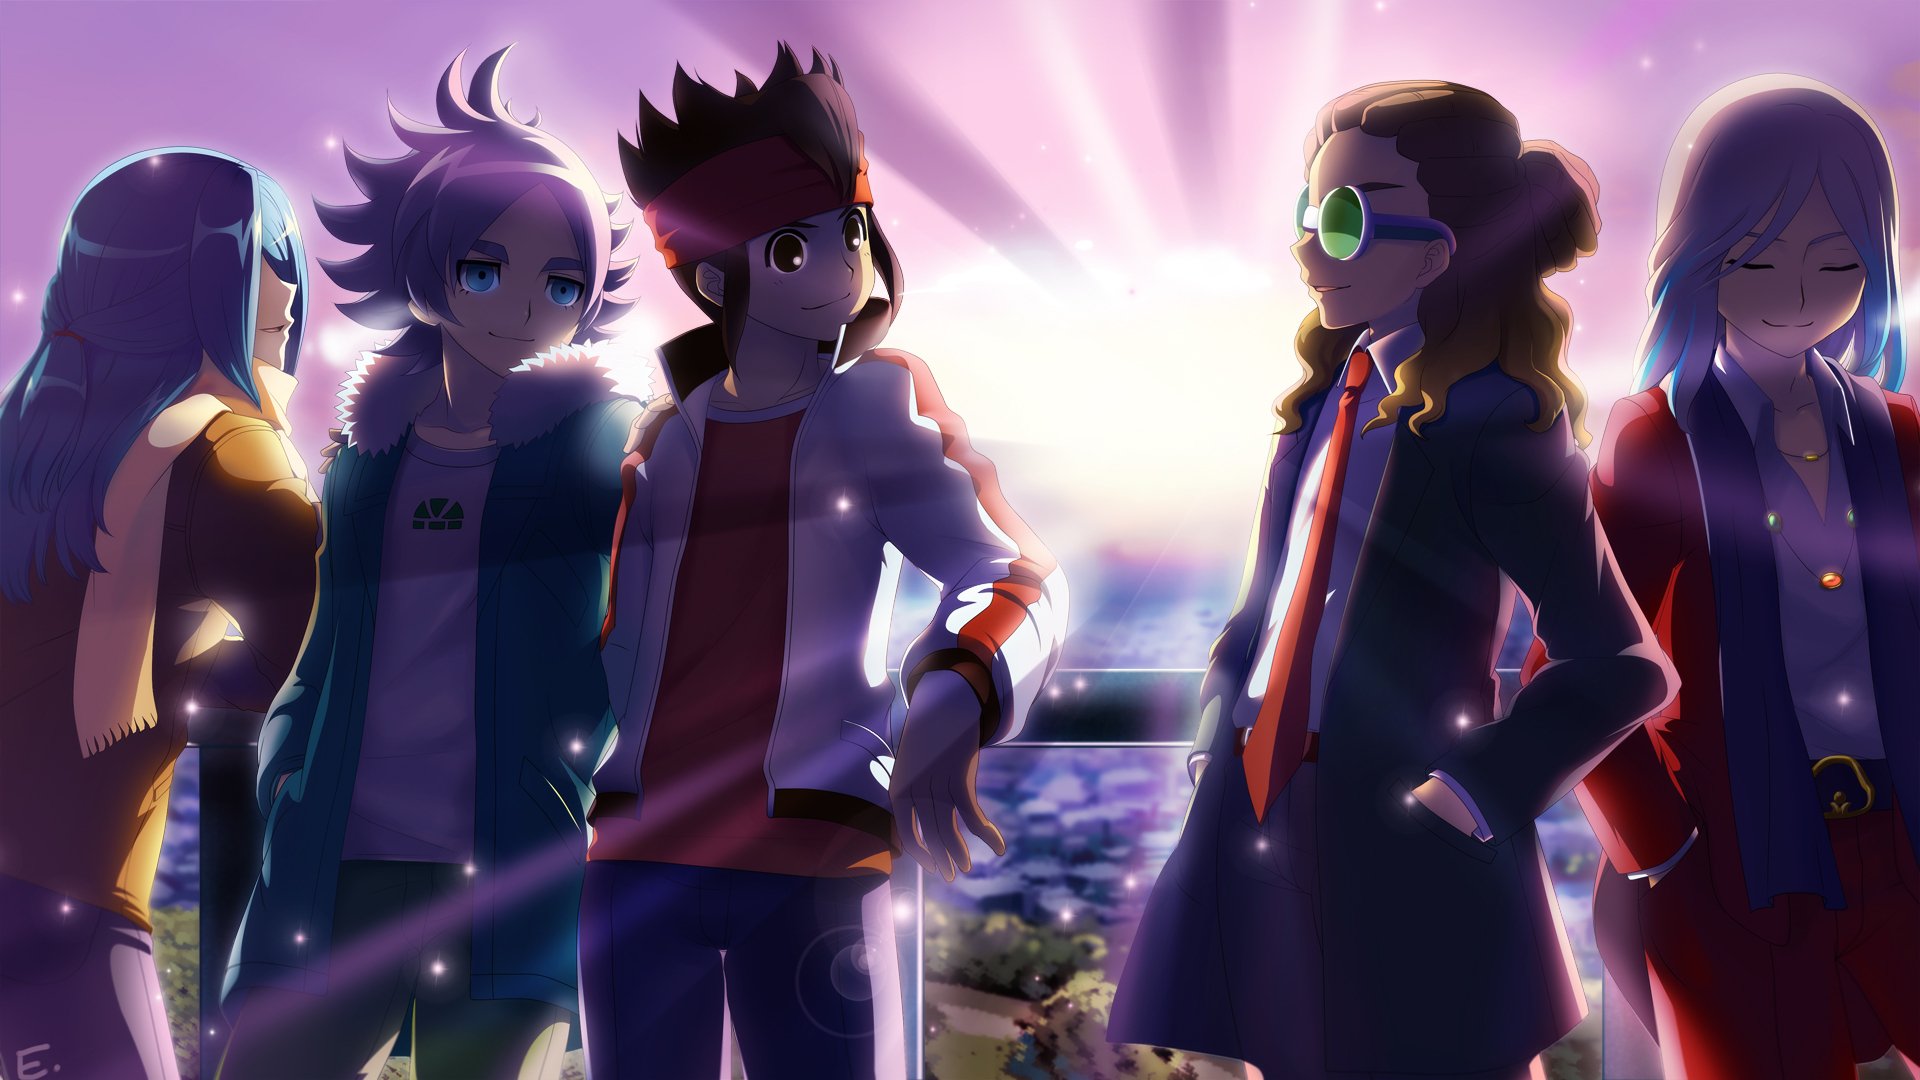 Inazuma Eleven A Sub Gallery By Ryuzu Wallpaper Abyss Images, Photos, Reviews